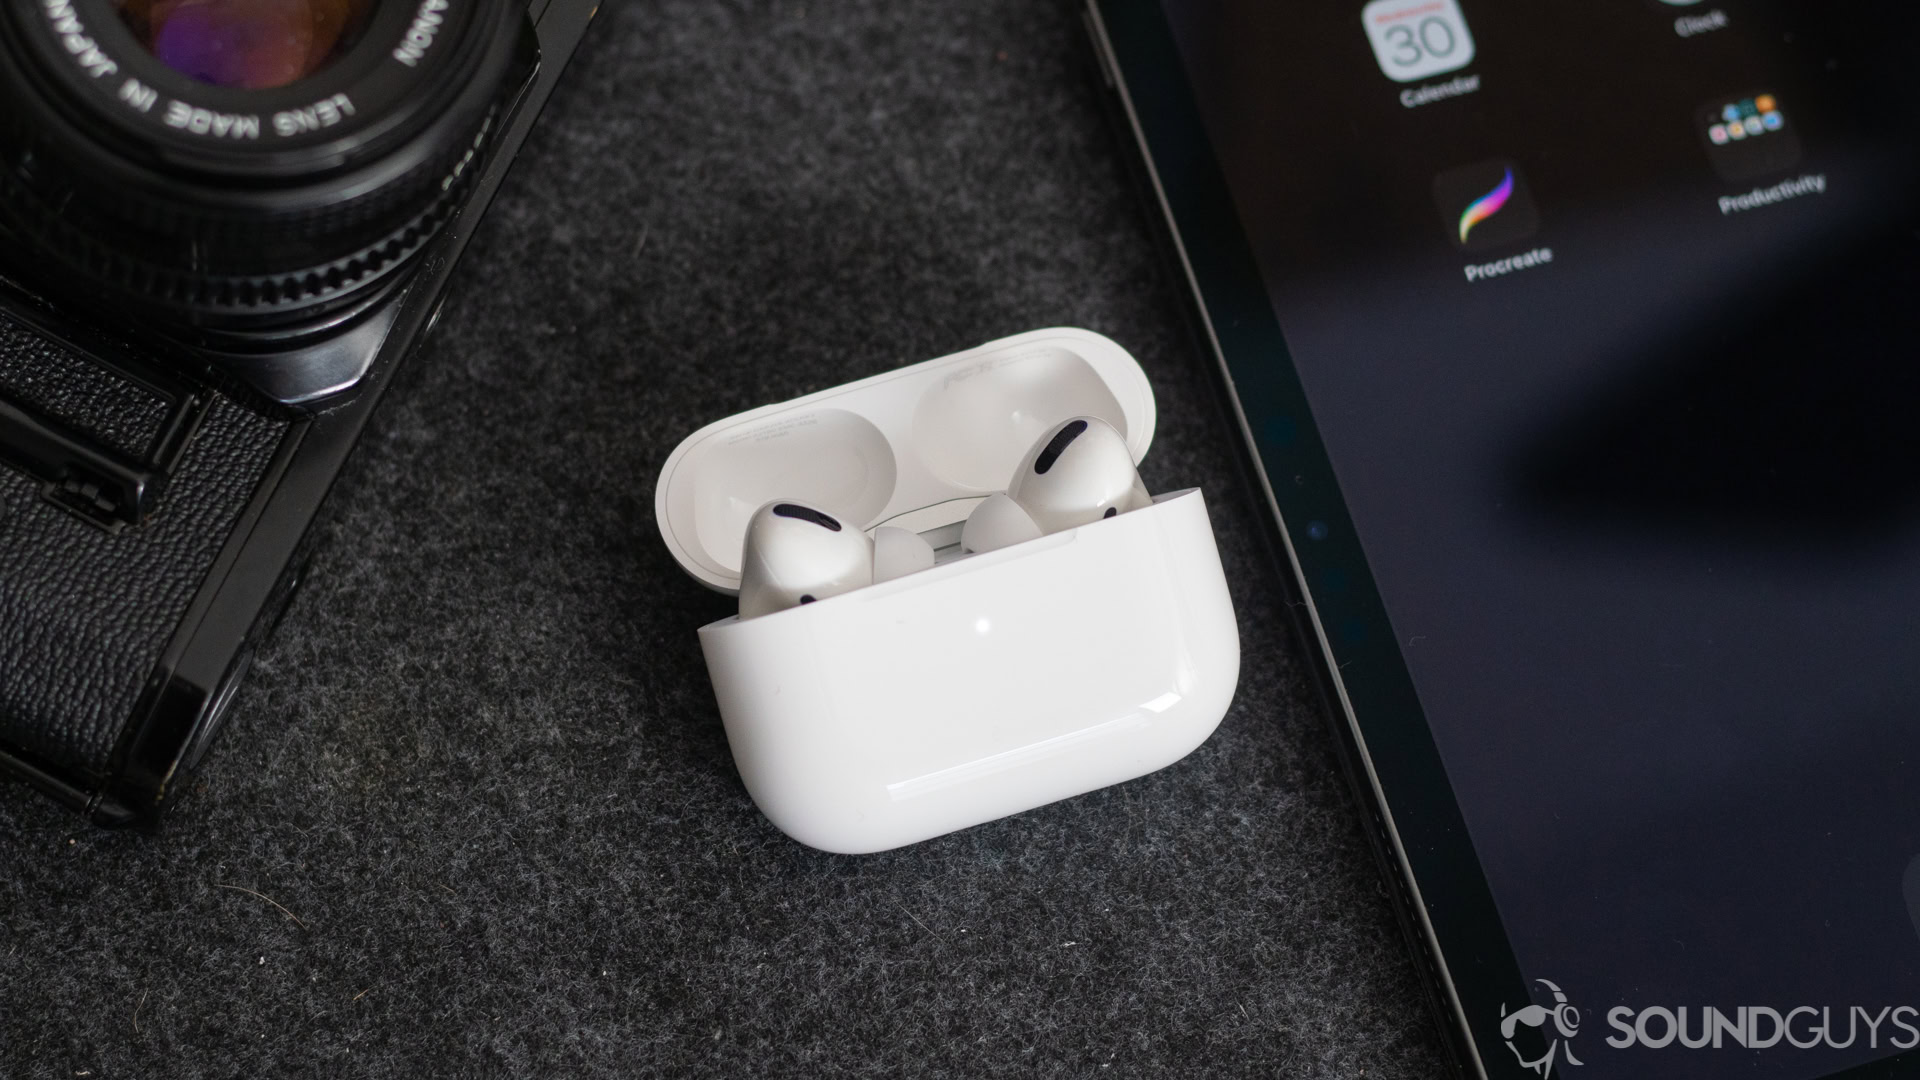 AirPods Pro in the wireless charging case next to the iPhone and digital camera.